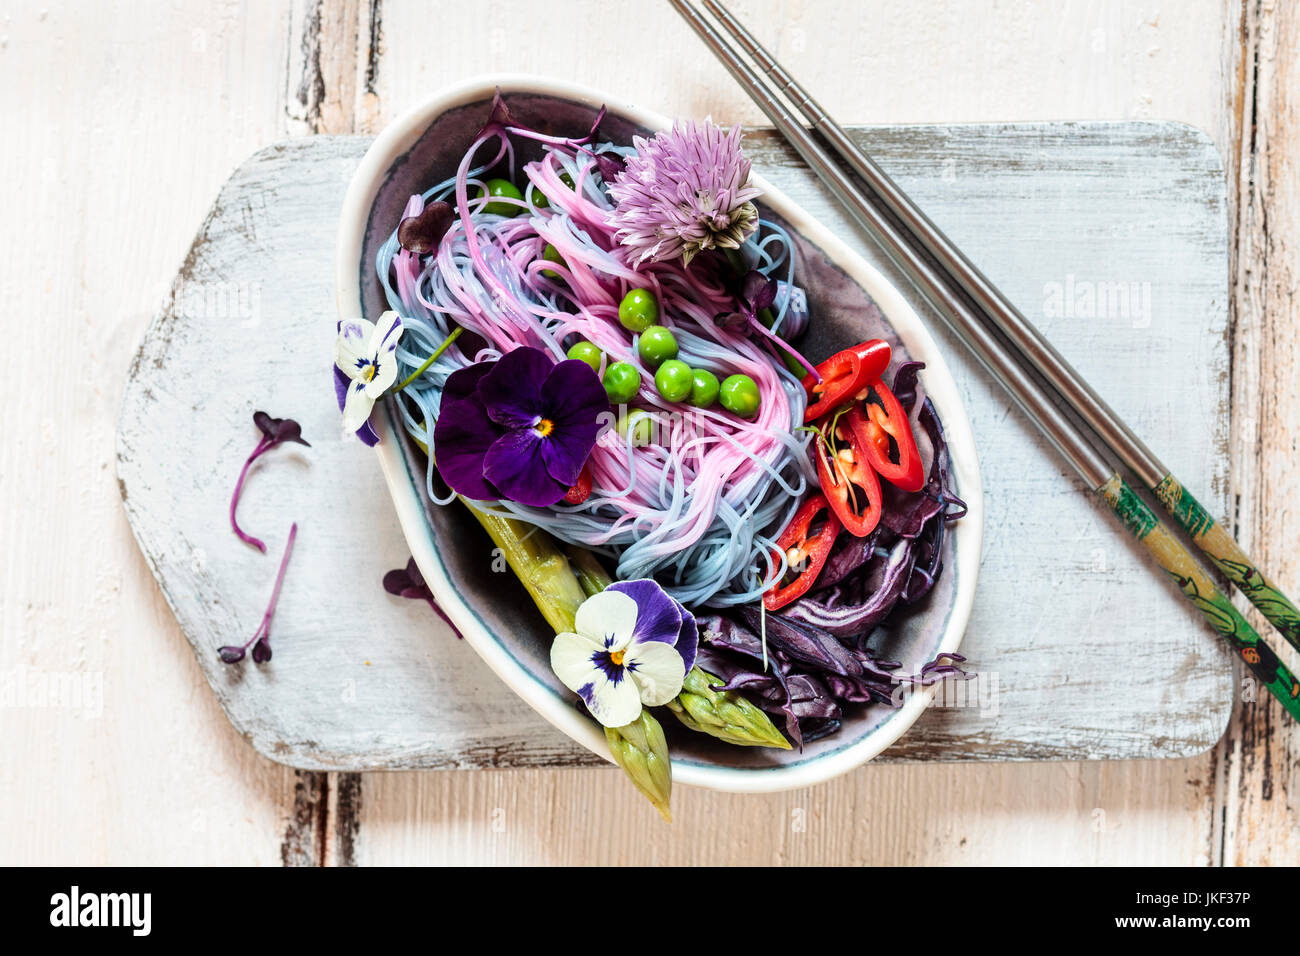 Vegan Unicorn Noodles, edible flowers, red cabbage, asparagus, peas, chili, sprouts Stock Photo